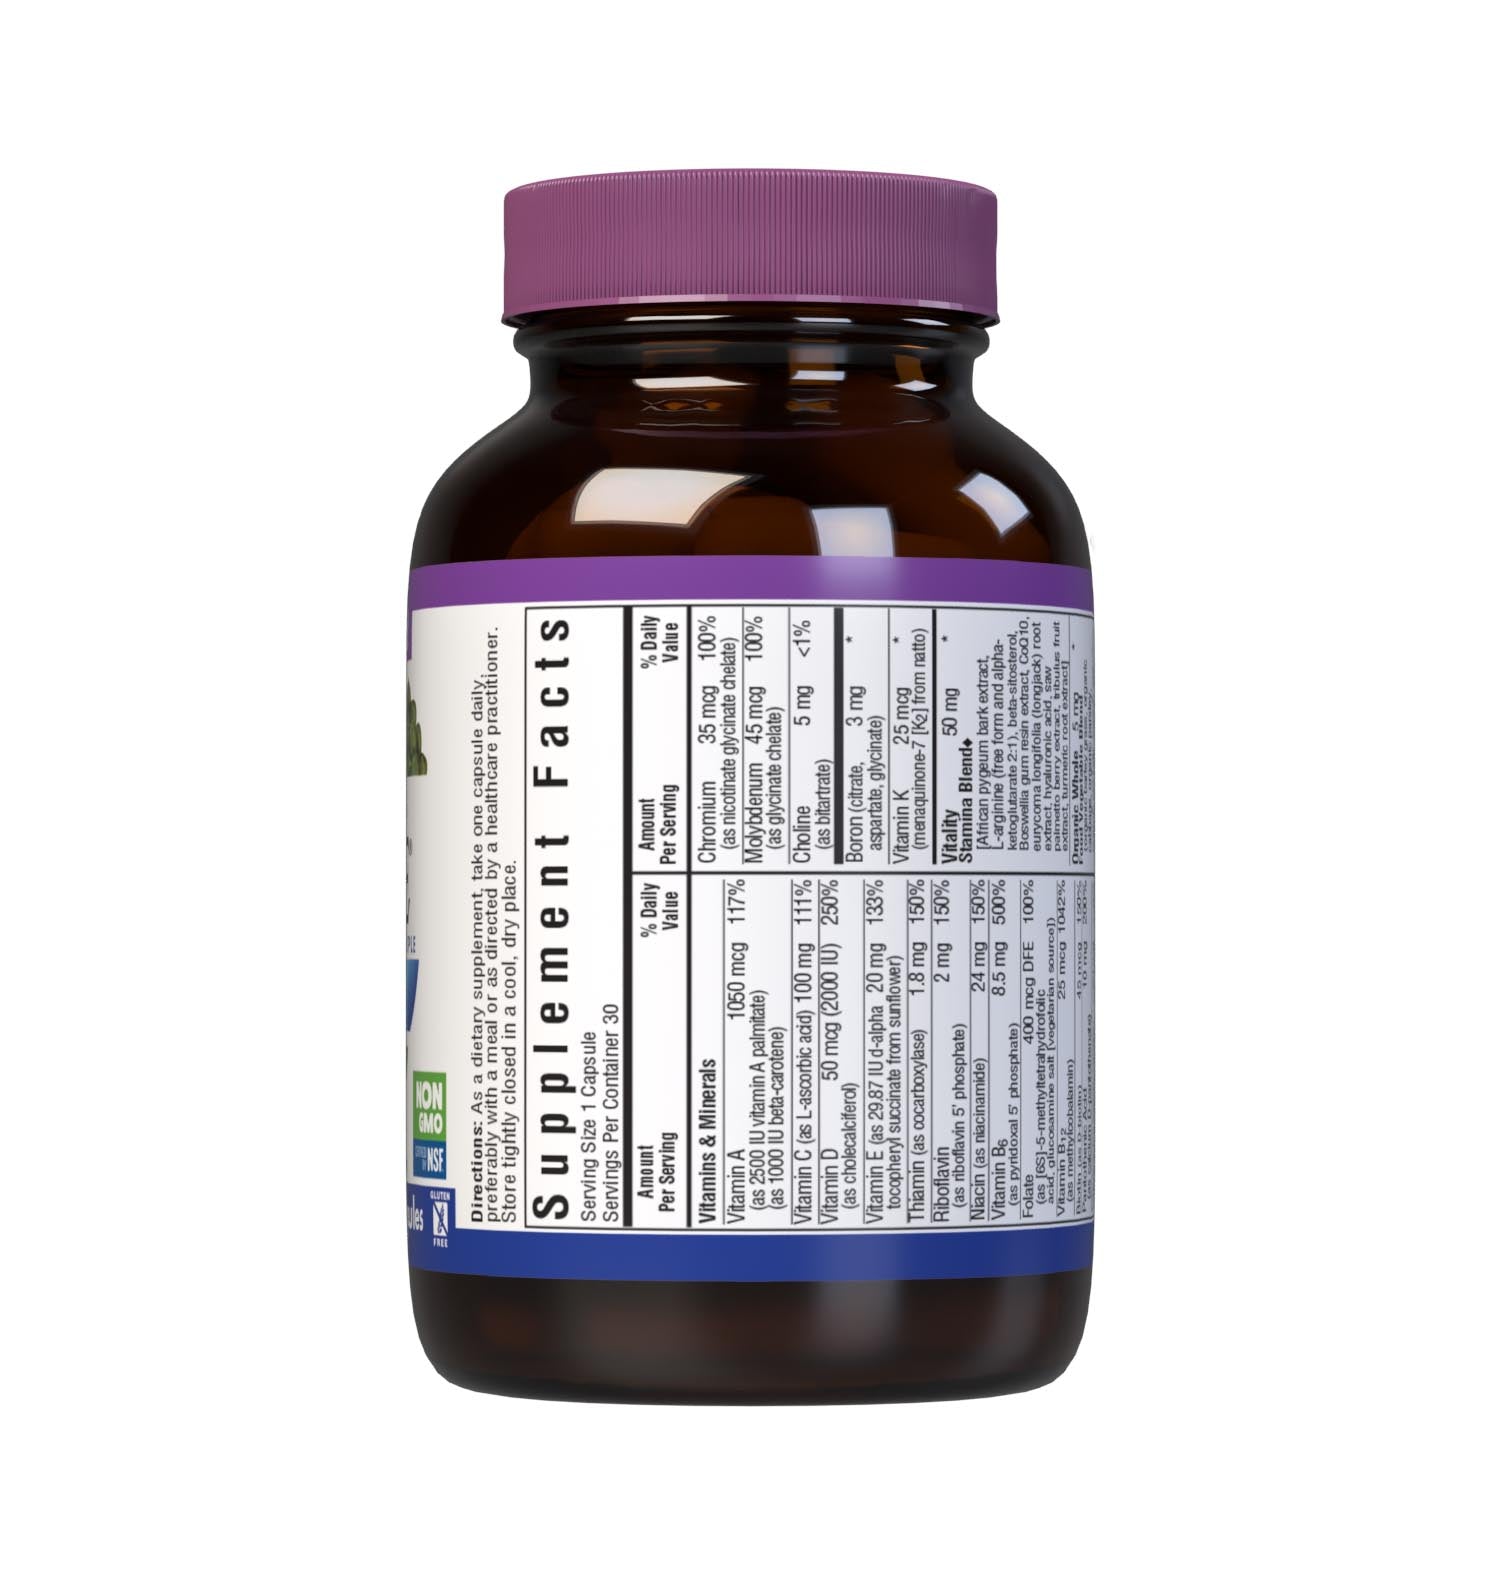 Bluebonnet’s Men’s ONE 40+ Whole Food-Based Multiple 30 Vegetable Capsules are formulated for daily nutritional support and vitality for men over 40, helping to increase energy and vitality, aid joint comfort, maintain prostate health, and support heart health. Supplement facts panel top. #size_30 count